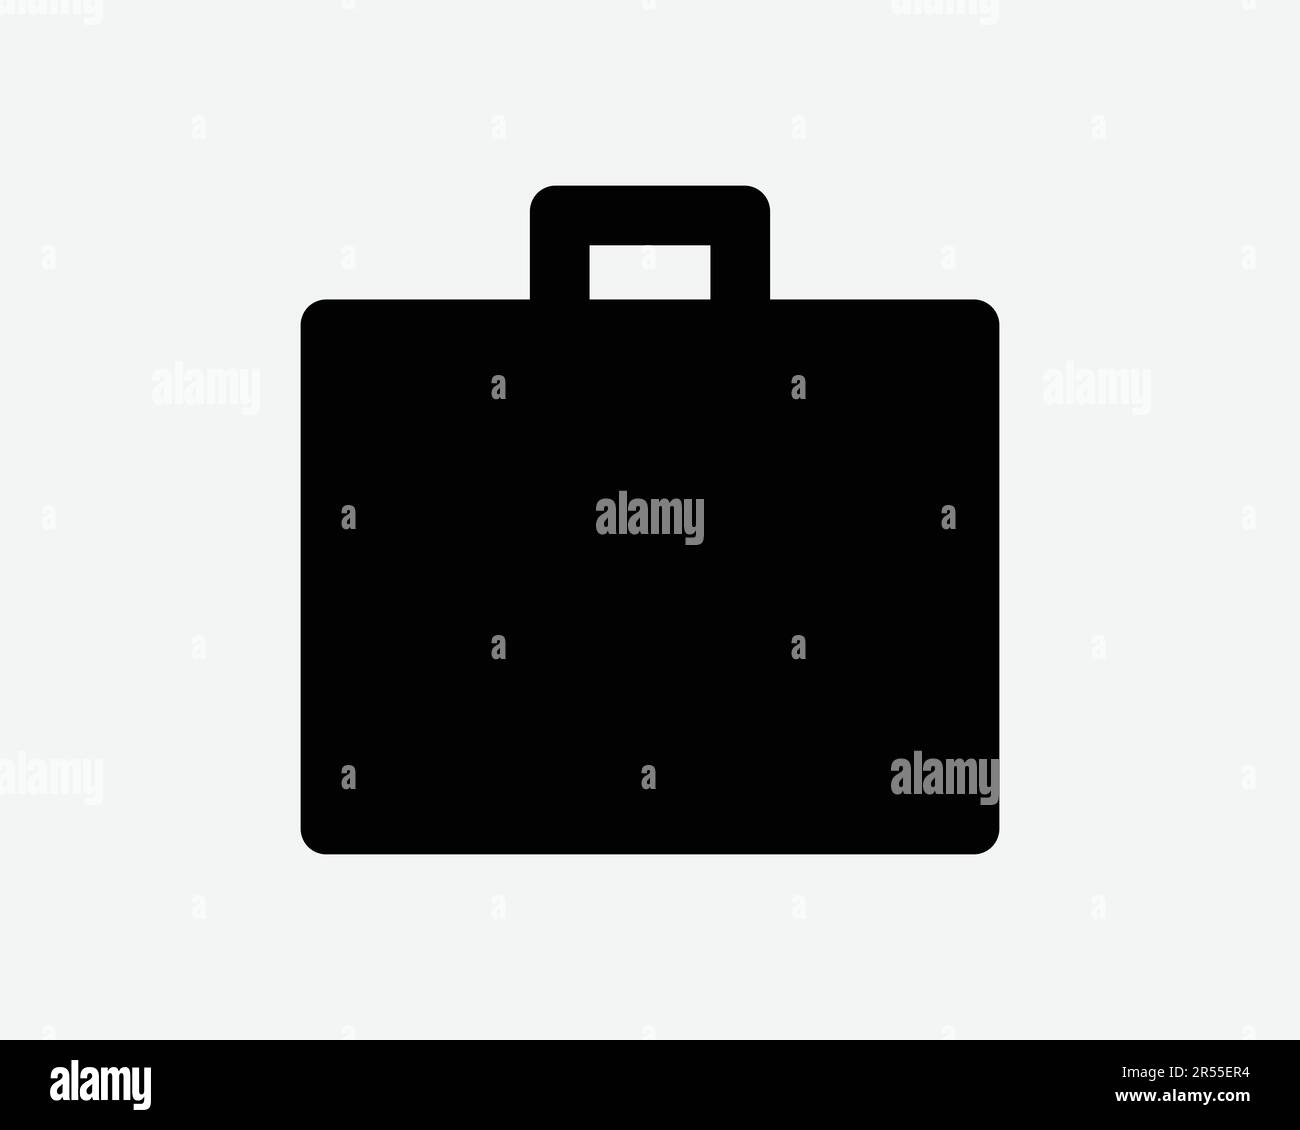 Briefcase Icon. Bag Luggage Suitcase Baggage Business Travel Office Suite Case Shape Sign Symbol Black Artwork Graphic Illustration Clipart EPS Vector Stock Vector